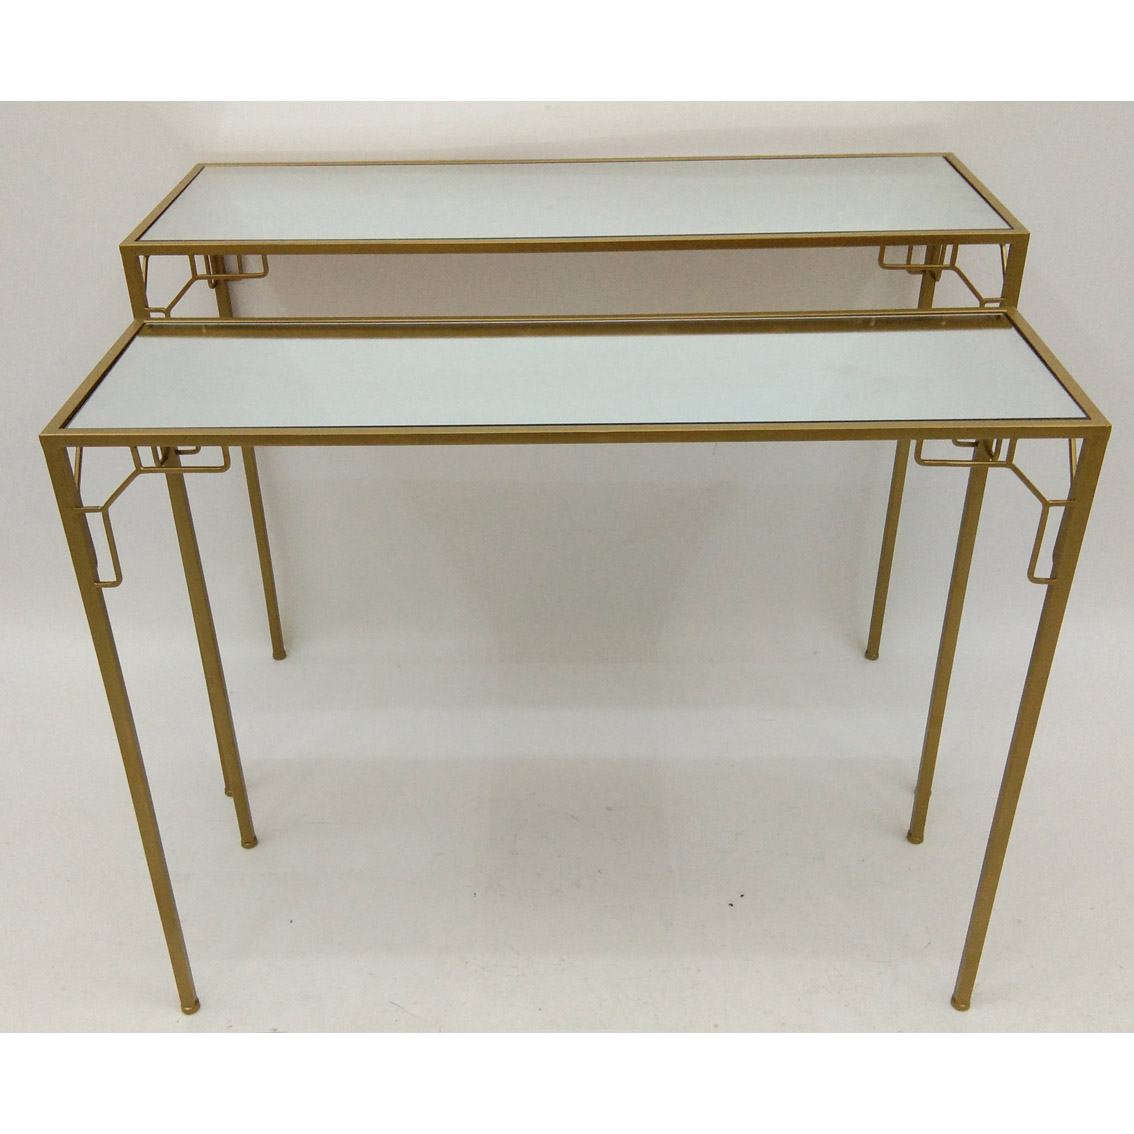 S/2 Nesting Shiny Gold Metal Console Table with white glass top